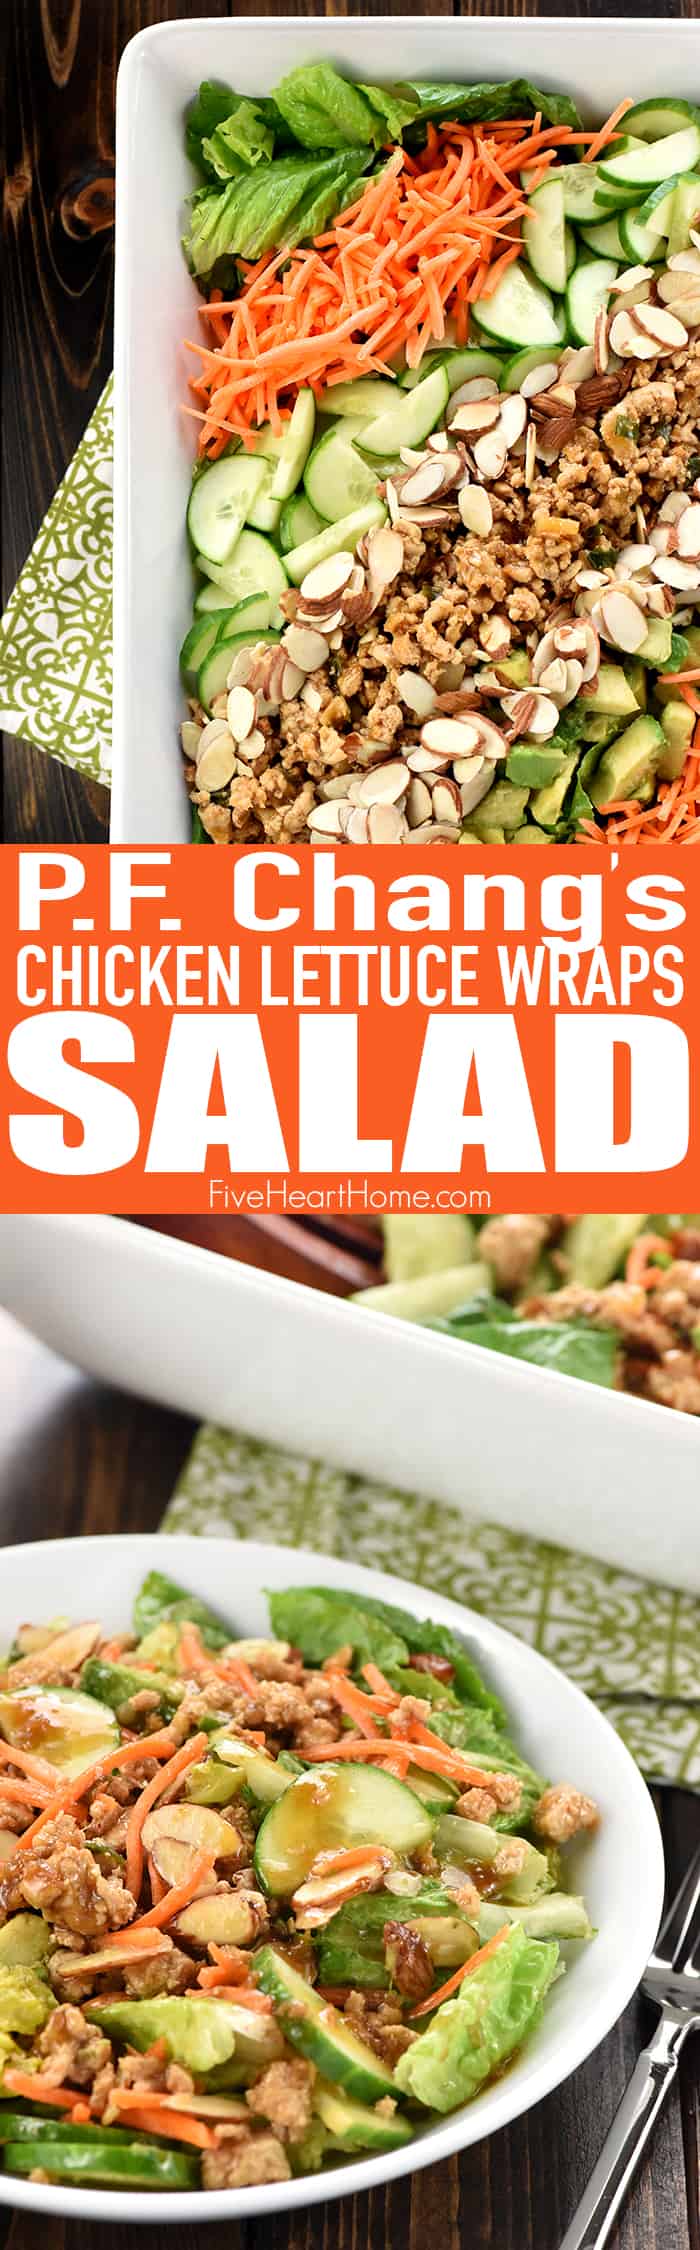 P.F. Chang's Chicken Lettuce Wraps Salad, two-photo collage with text